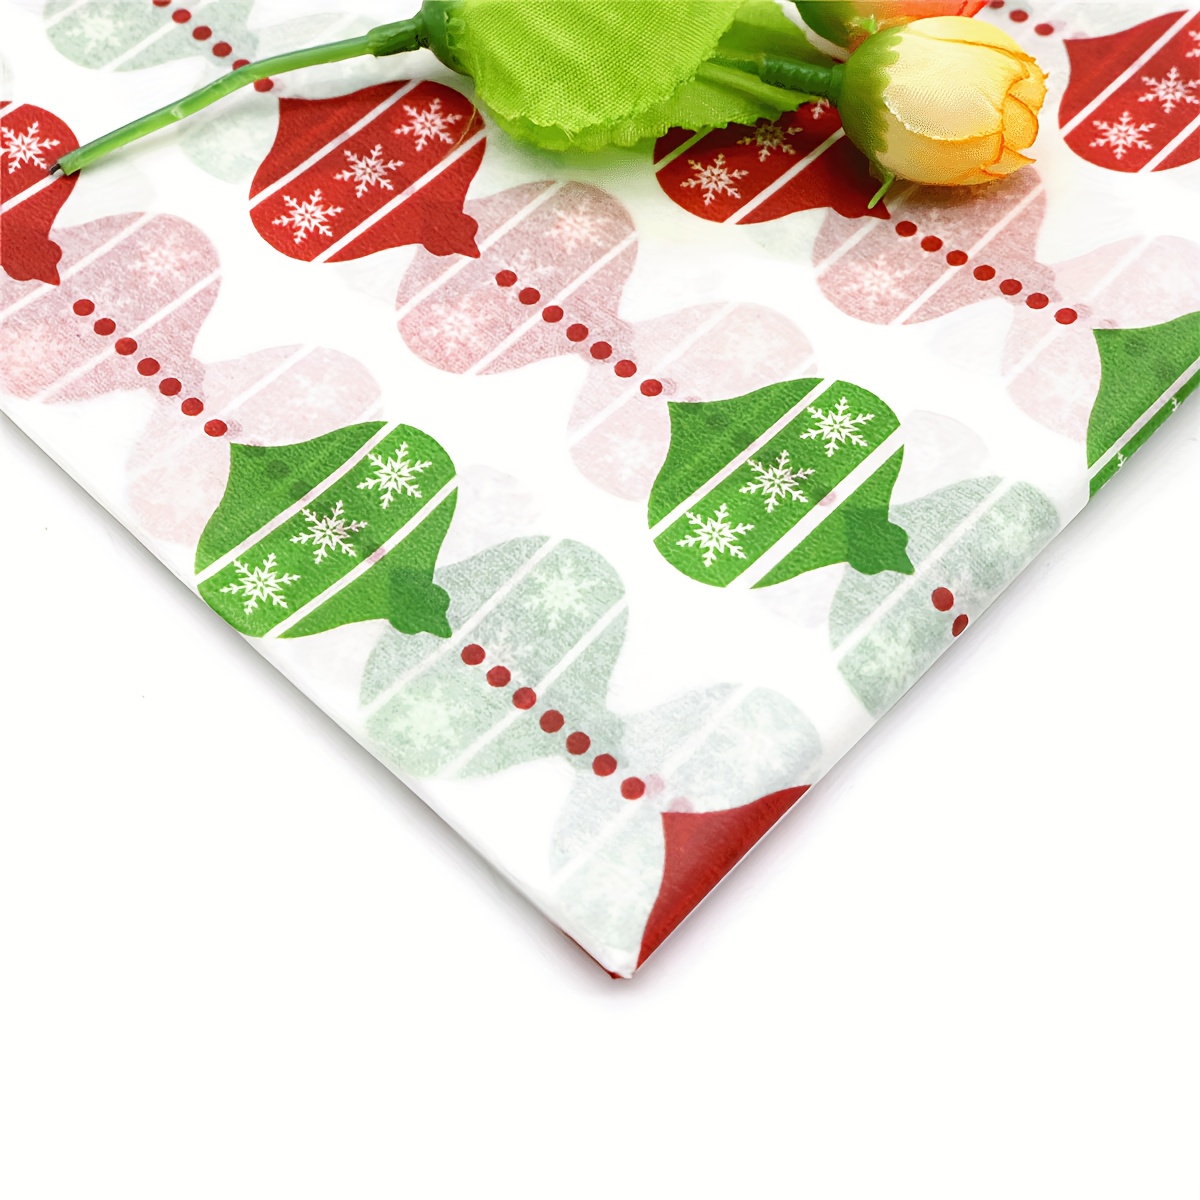 eco friendly wrapping paper handmade and